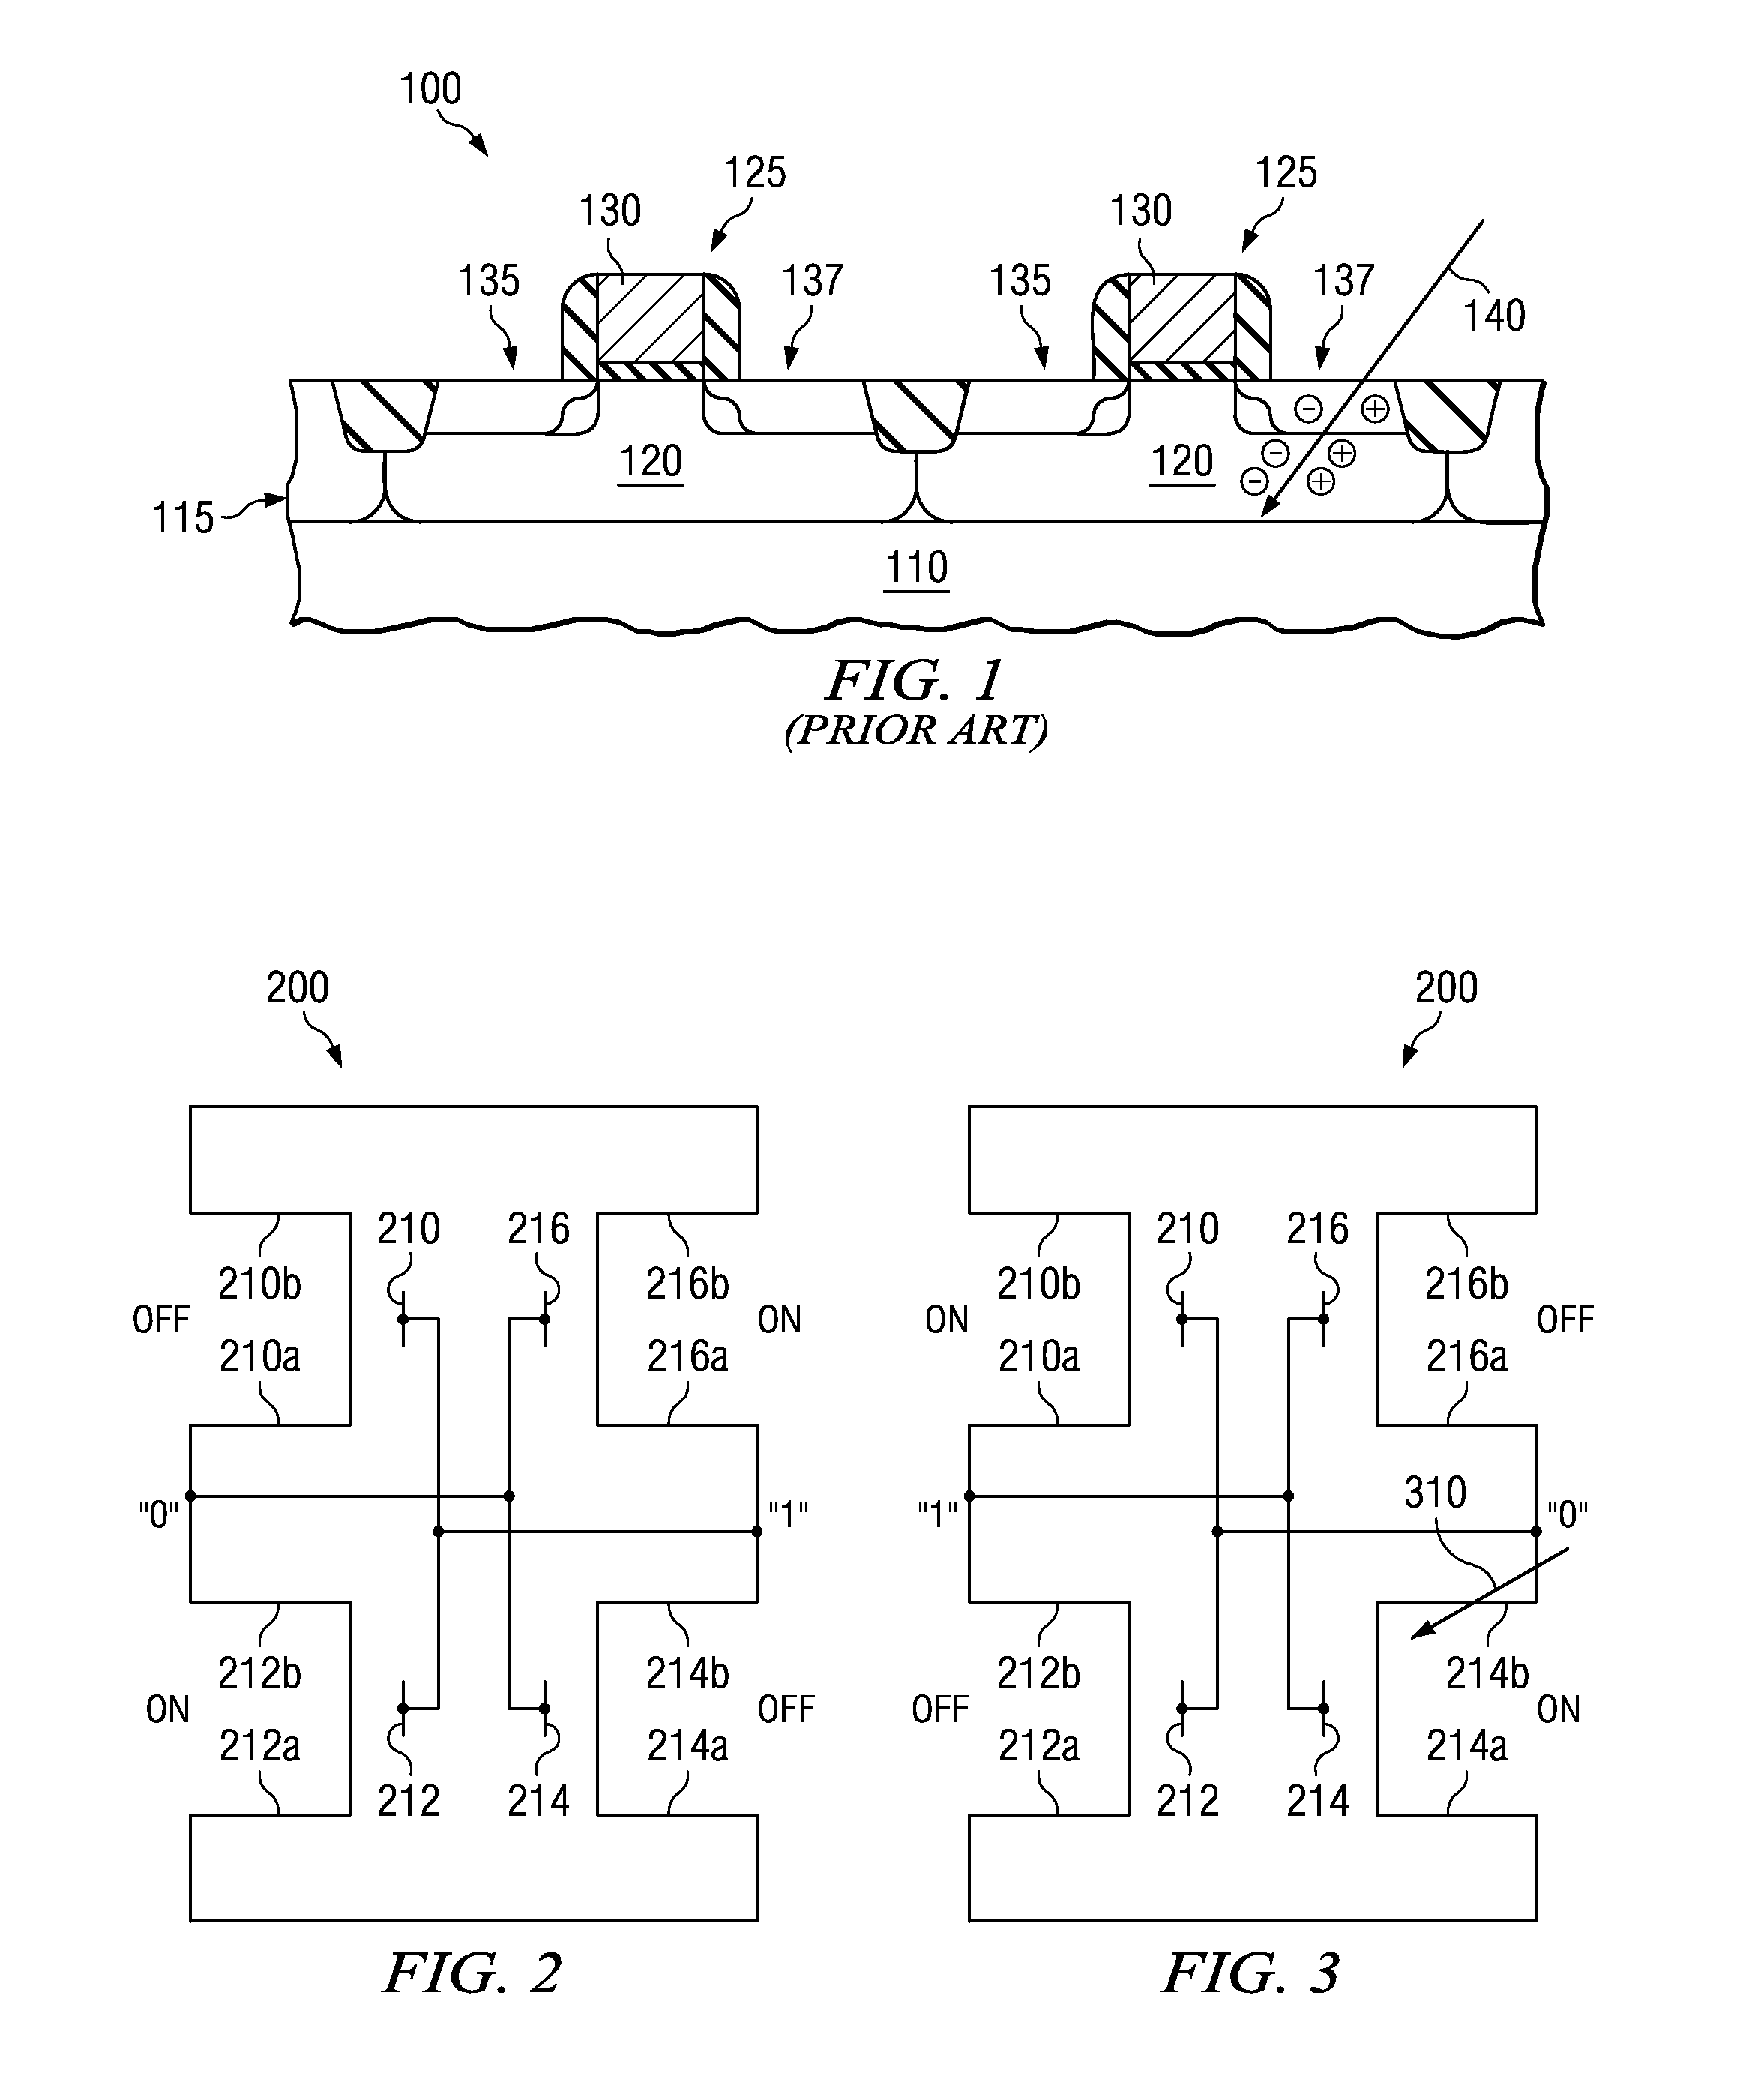 Method of fabricating an integrated circuit to improve soft error performance